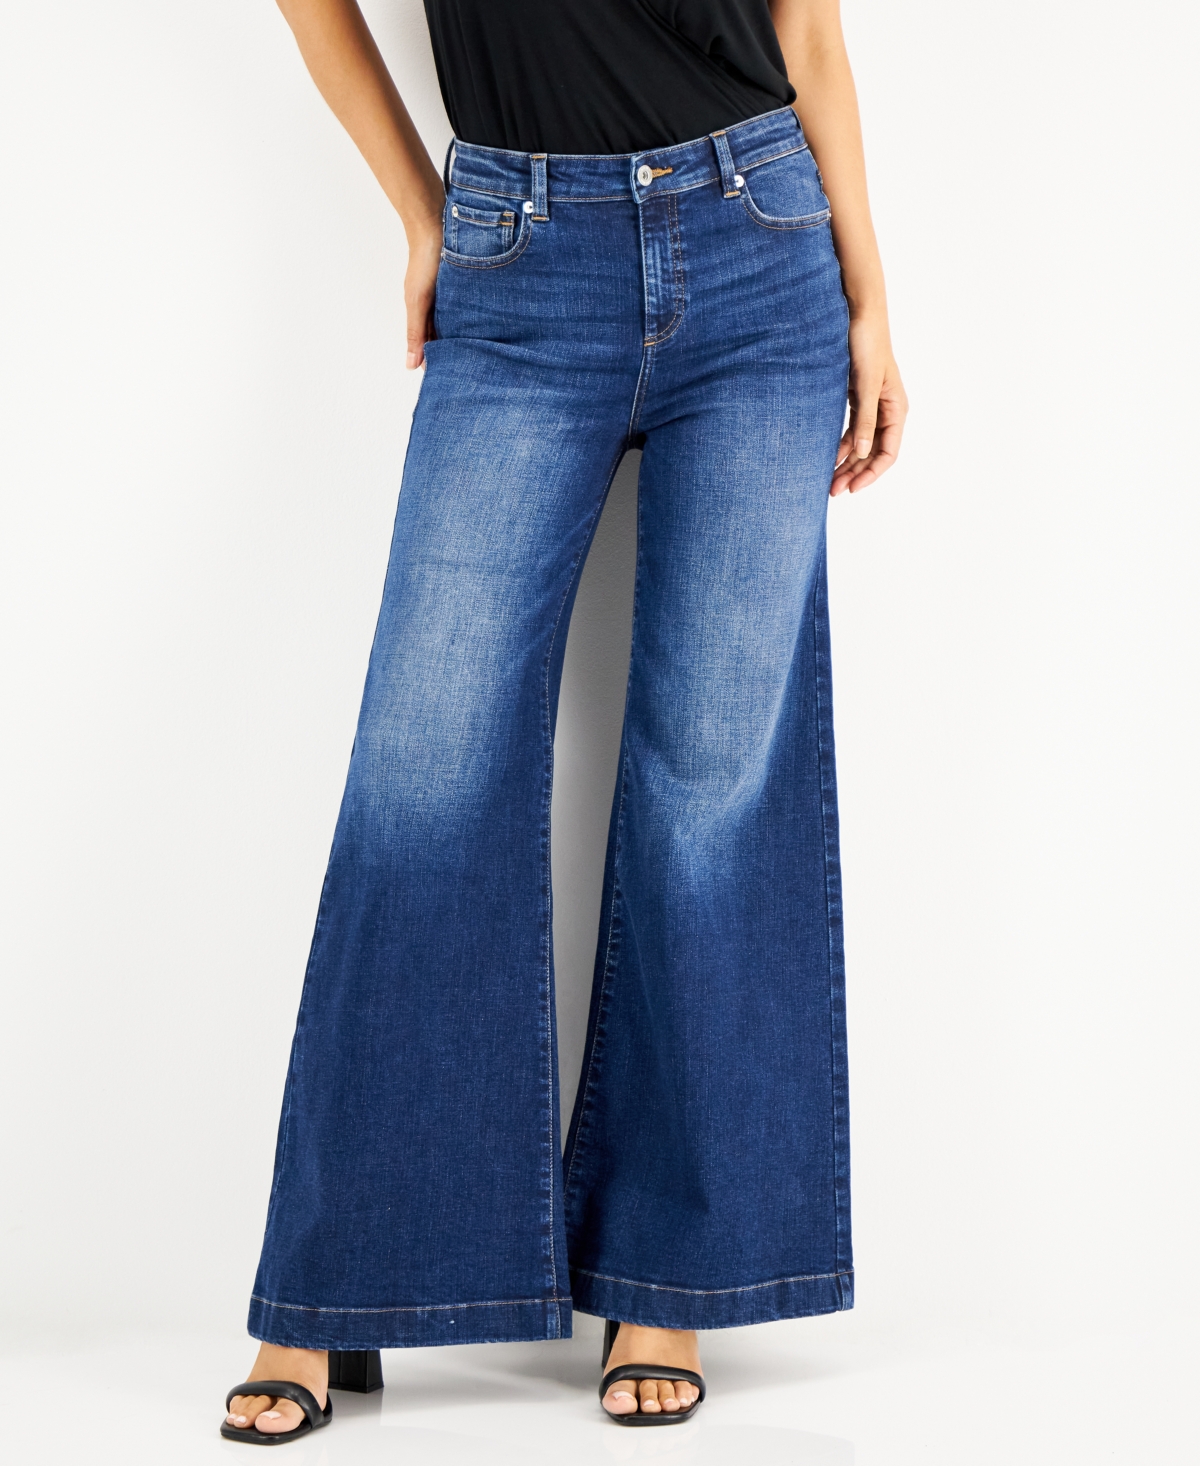  Inc International Concepts Women's High-Rise Flare Jeans, Created for Macy's